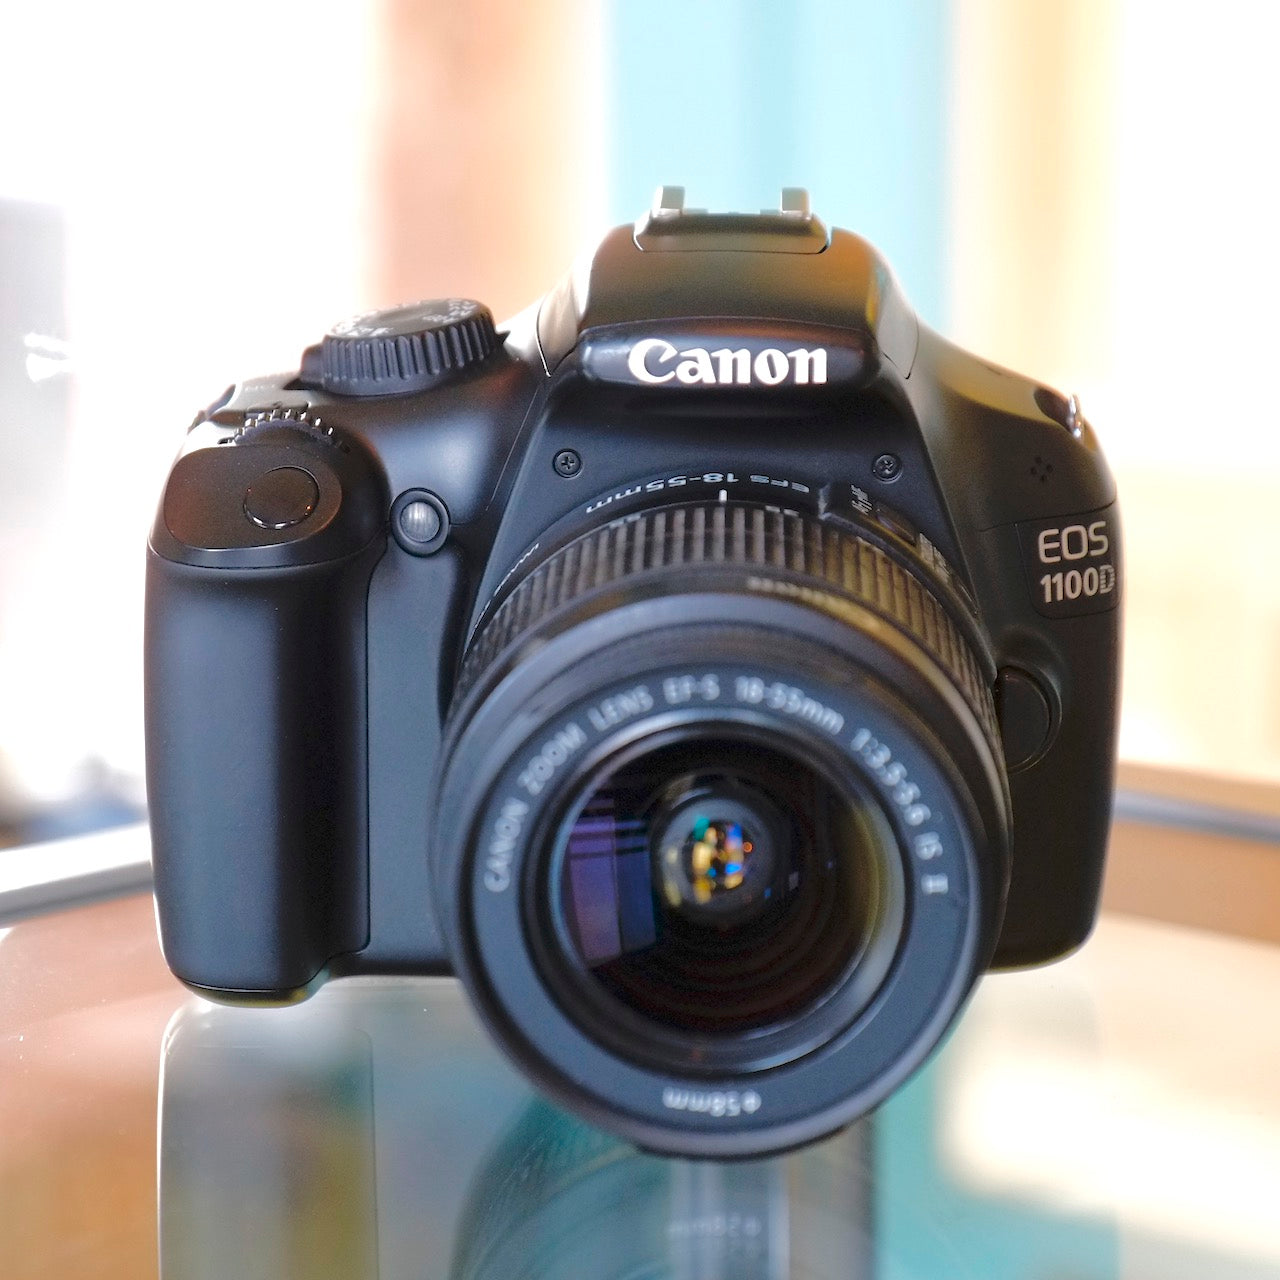 Canon EOS 1100D (AKA Rebel T3) with 18-55mm f3.5-5.6 II